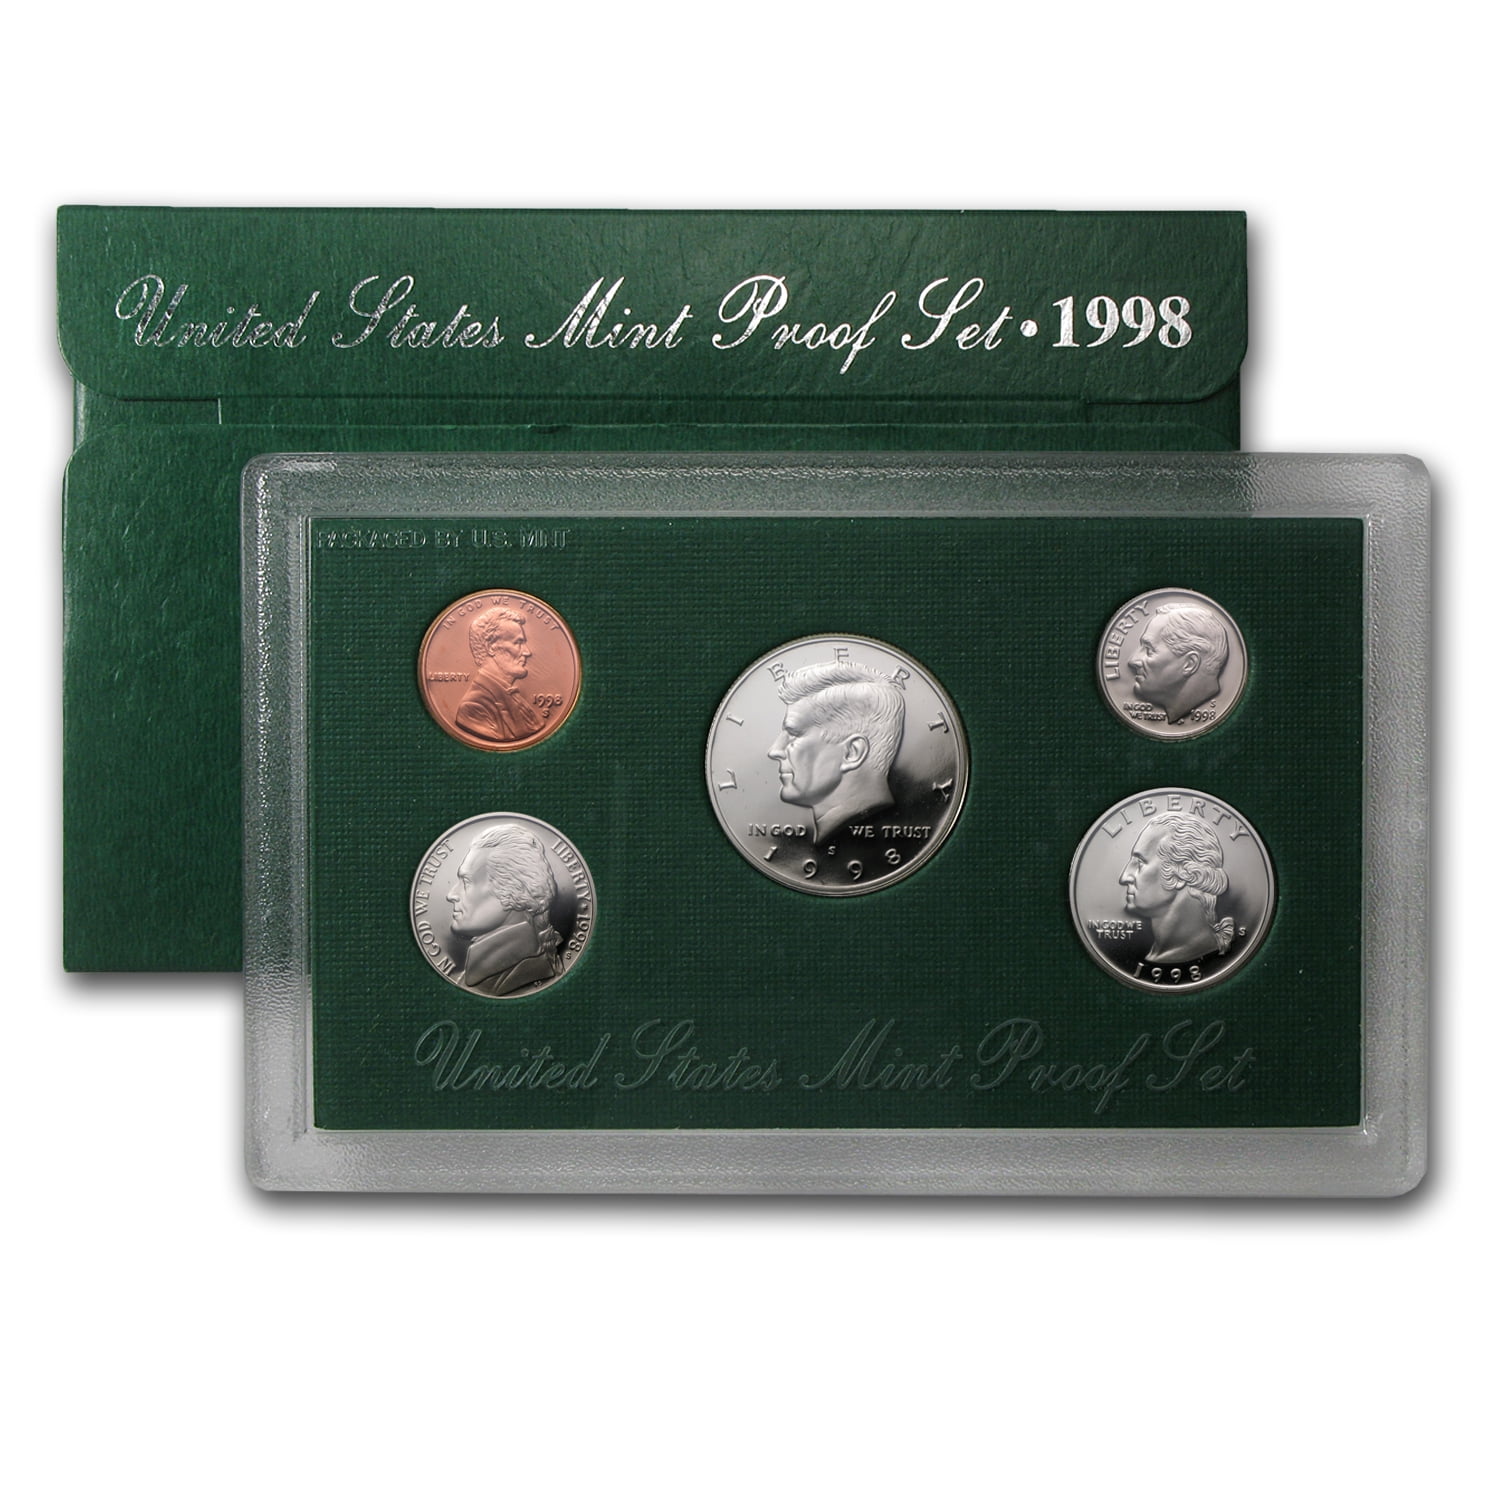 1995 S United States Mint ANNUAL 5 Coin Proof Set Original Box and COA 